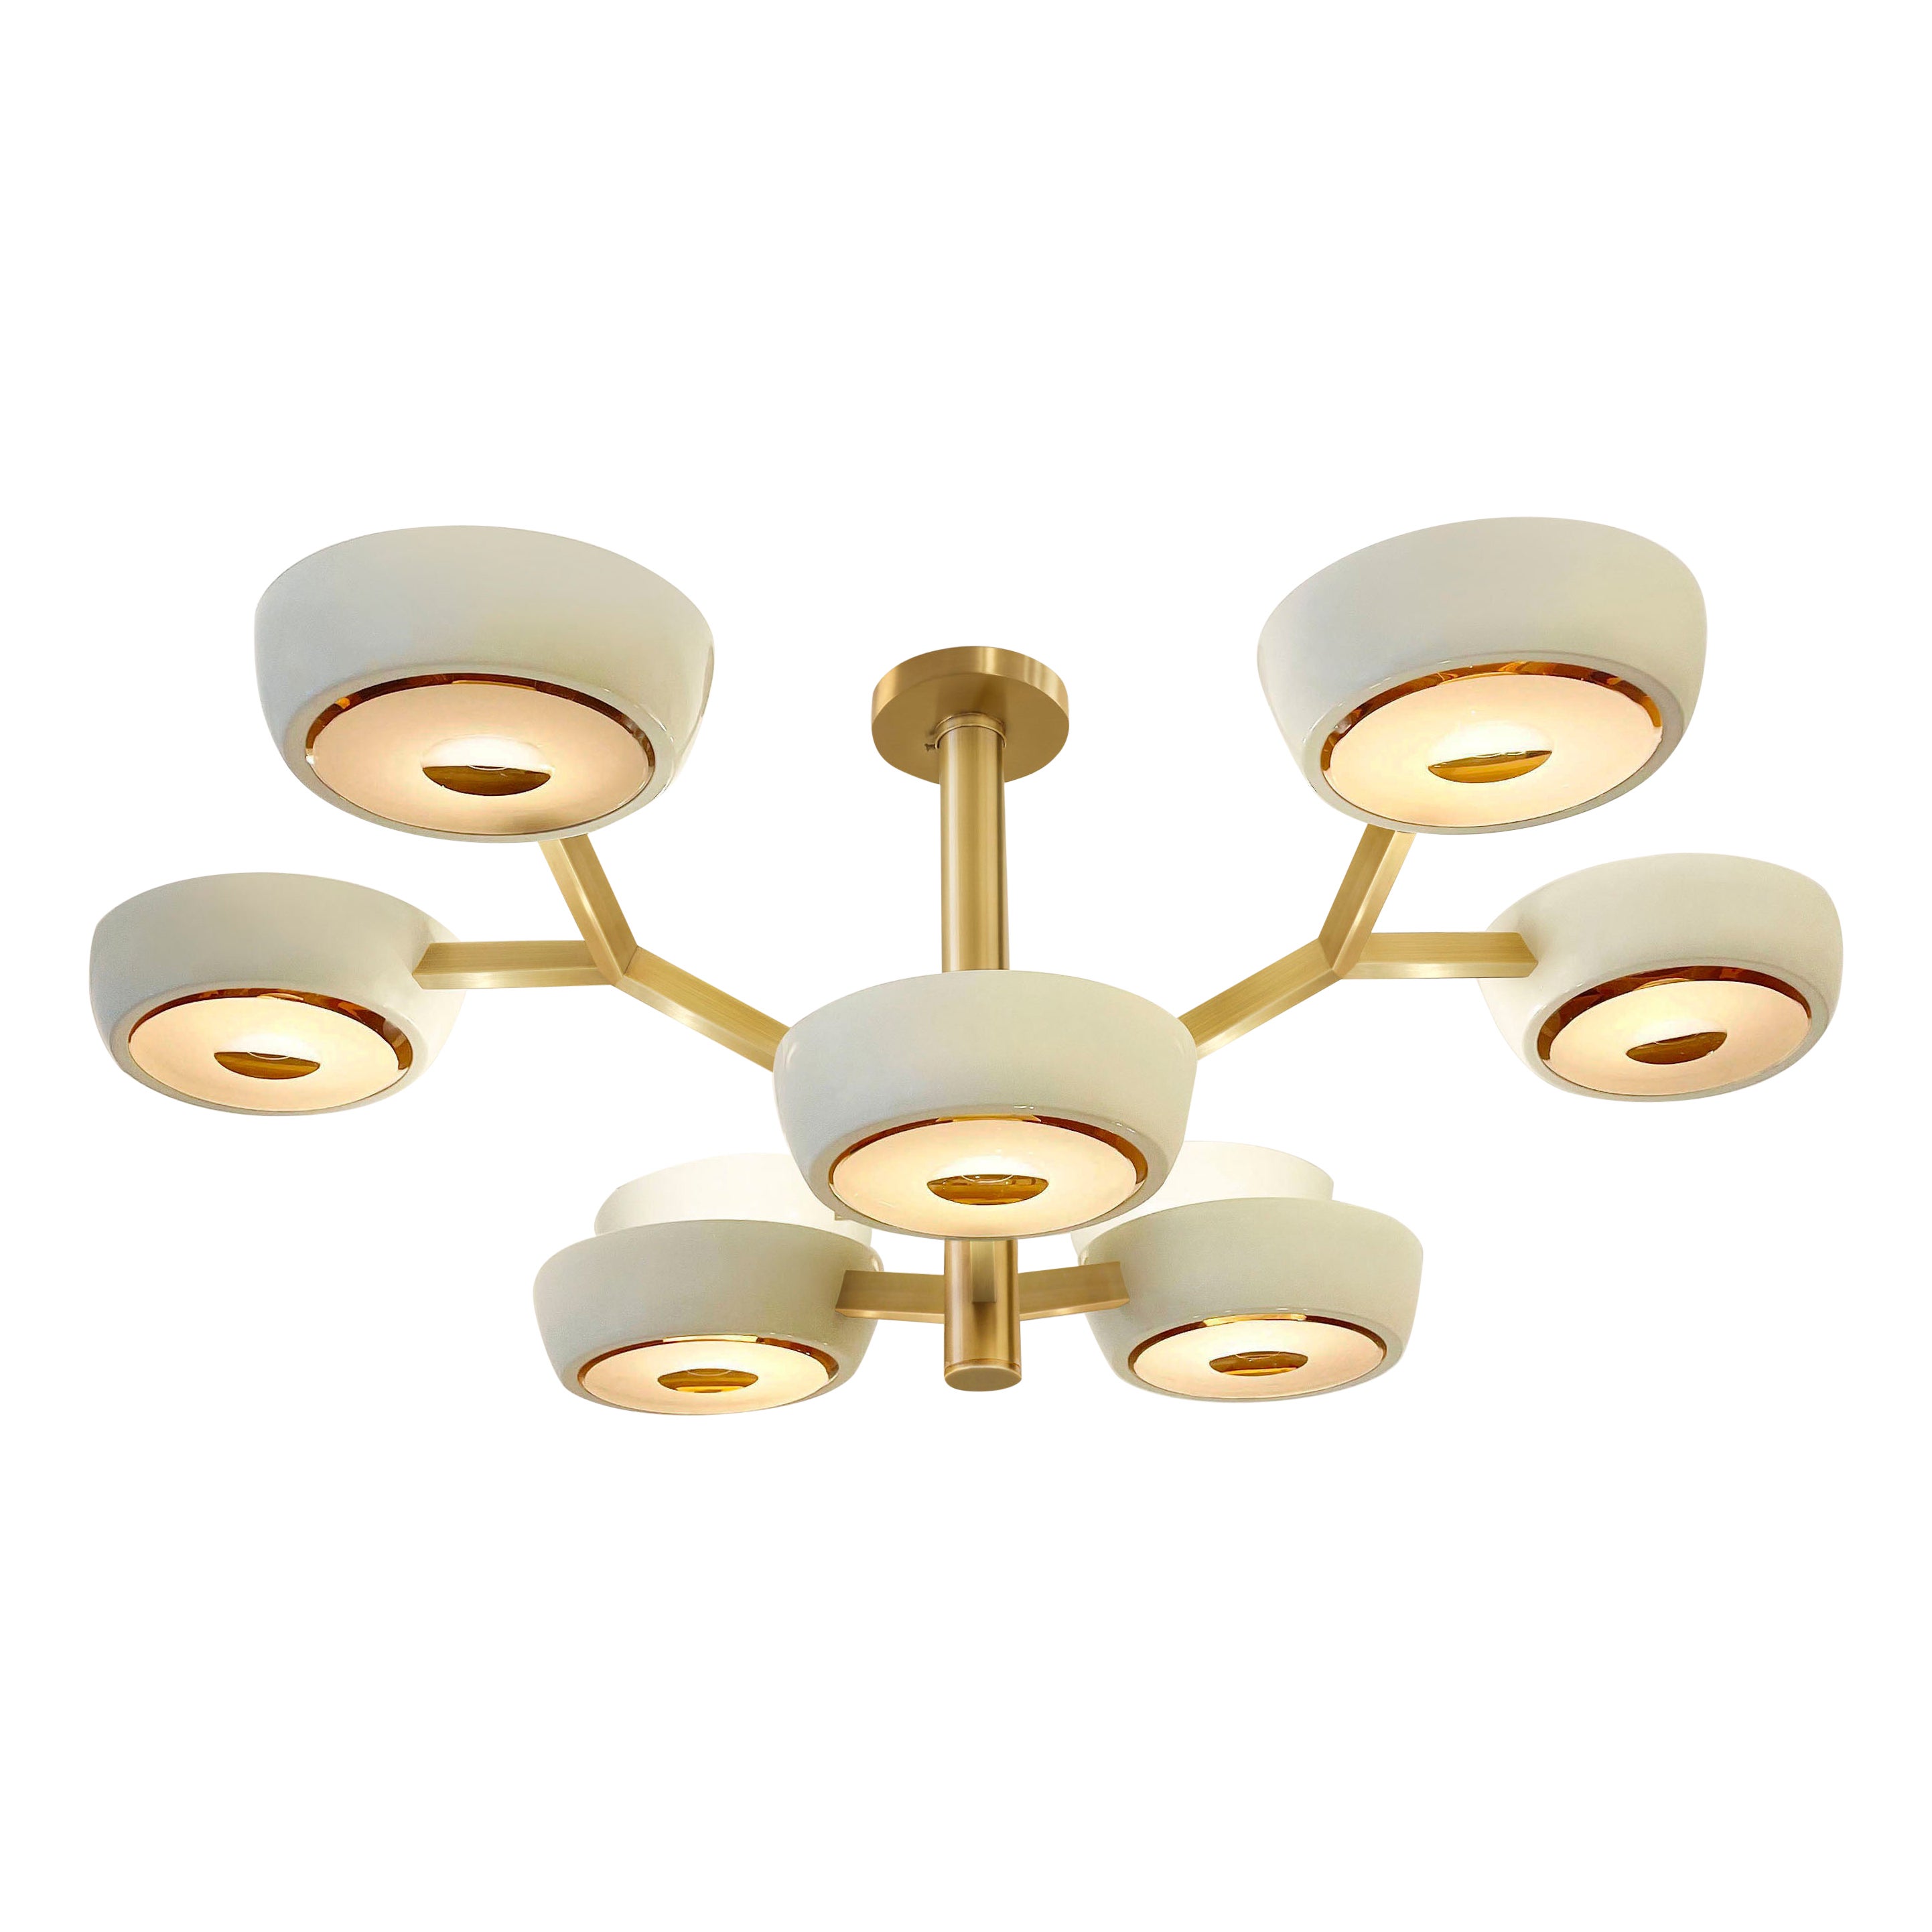 Rose Ceiling Light by Gaspare Asaro-Satin Brass Finish For Sale